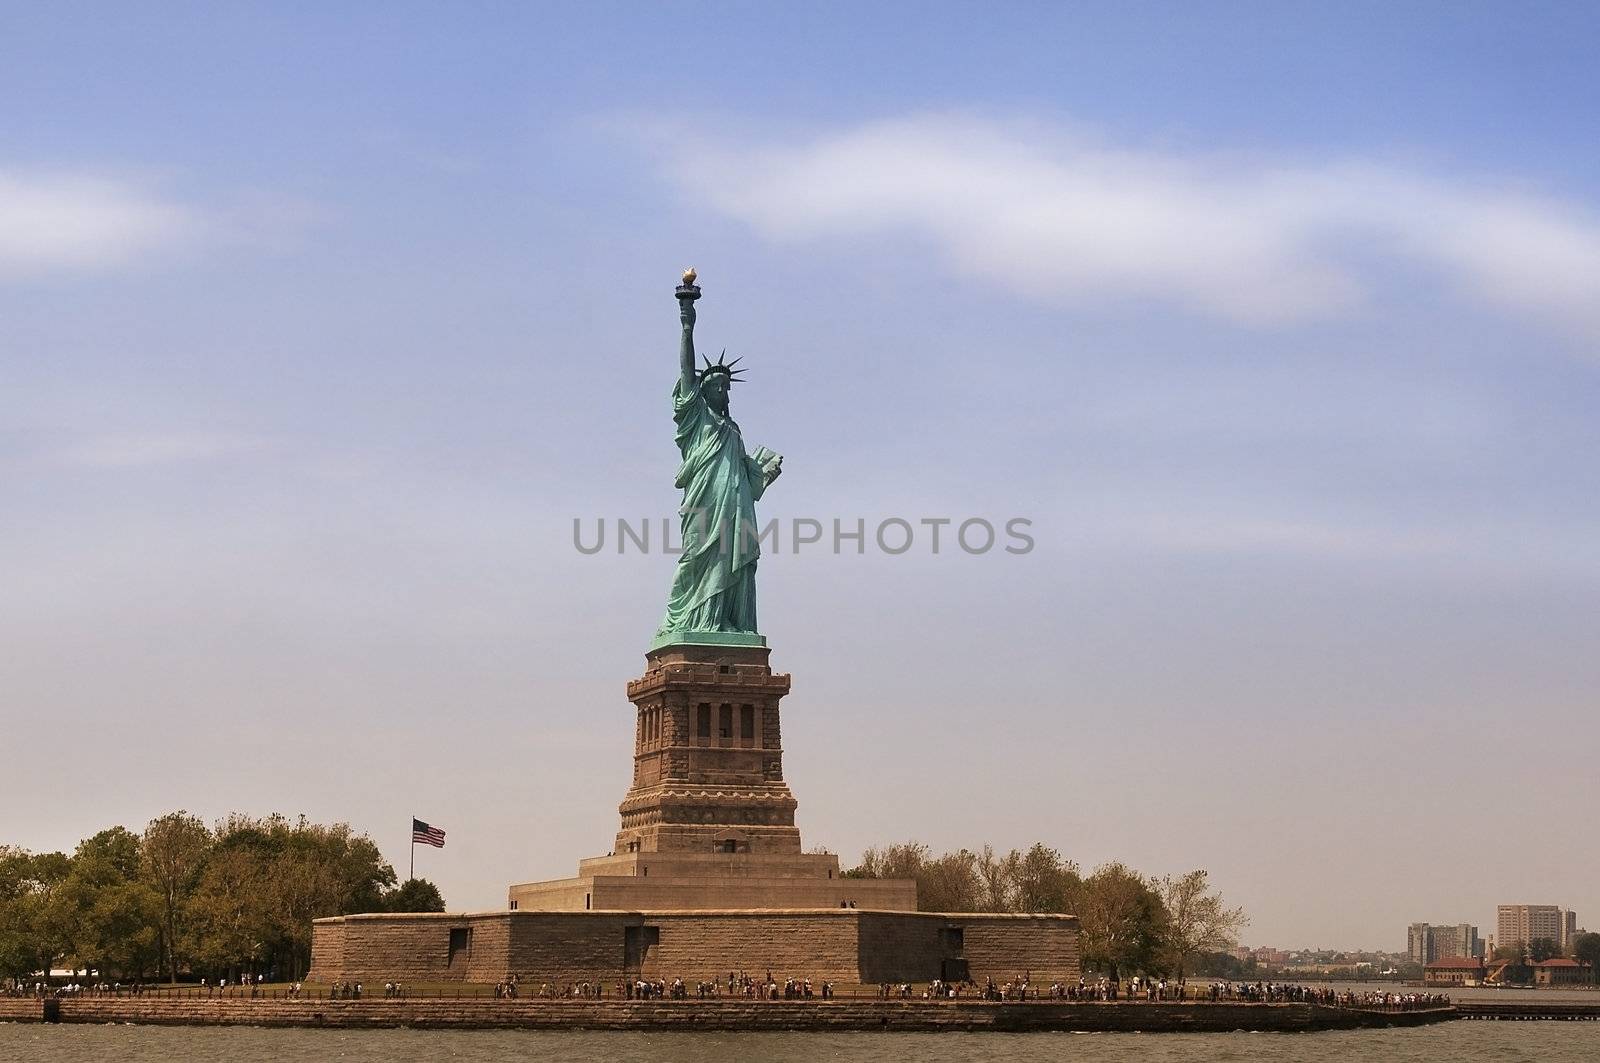 Statue of Lady Liberty in New York by irisphoto4